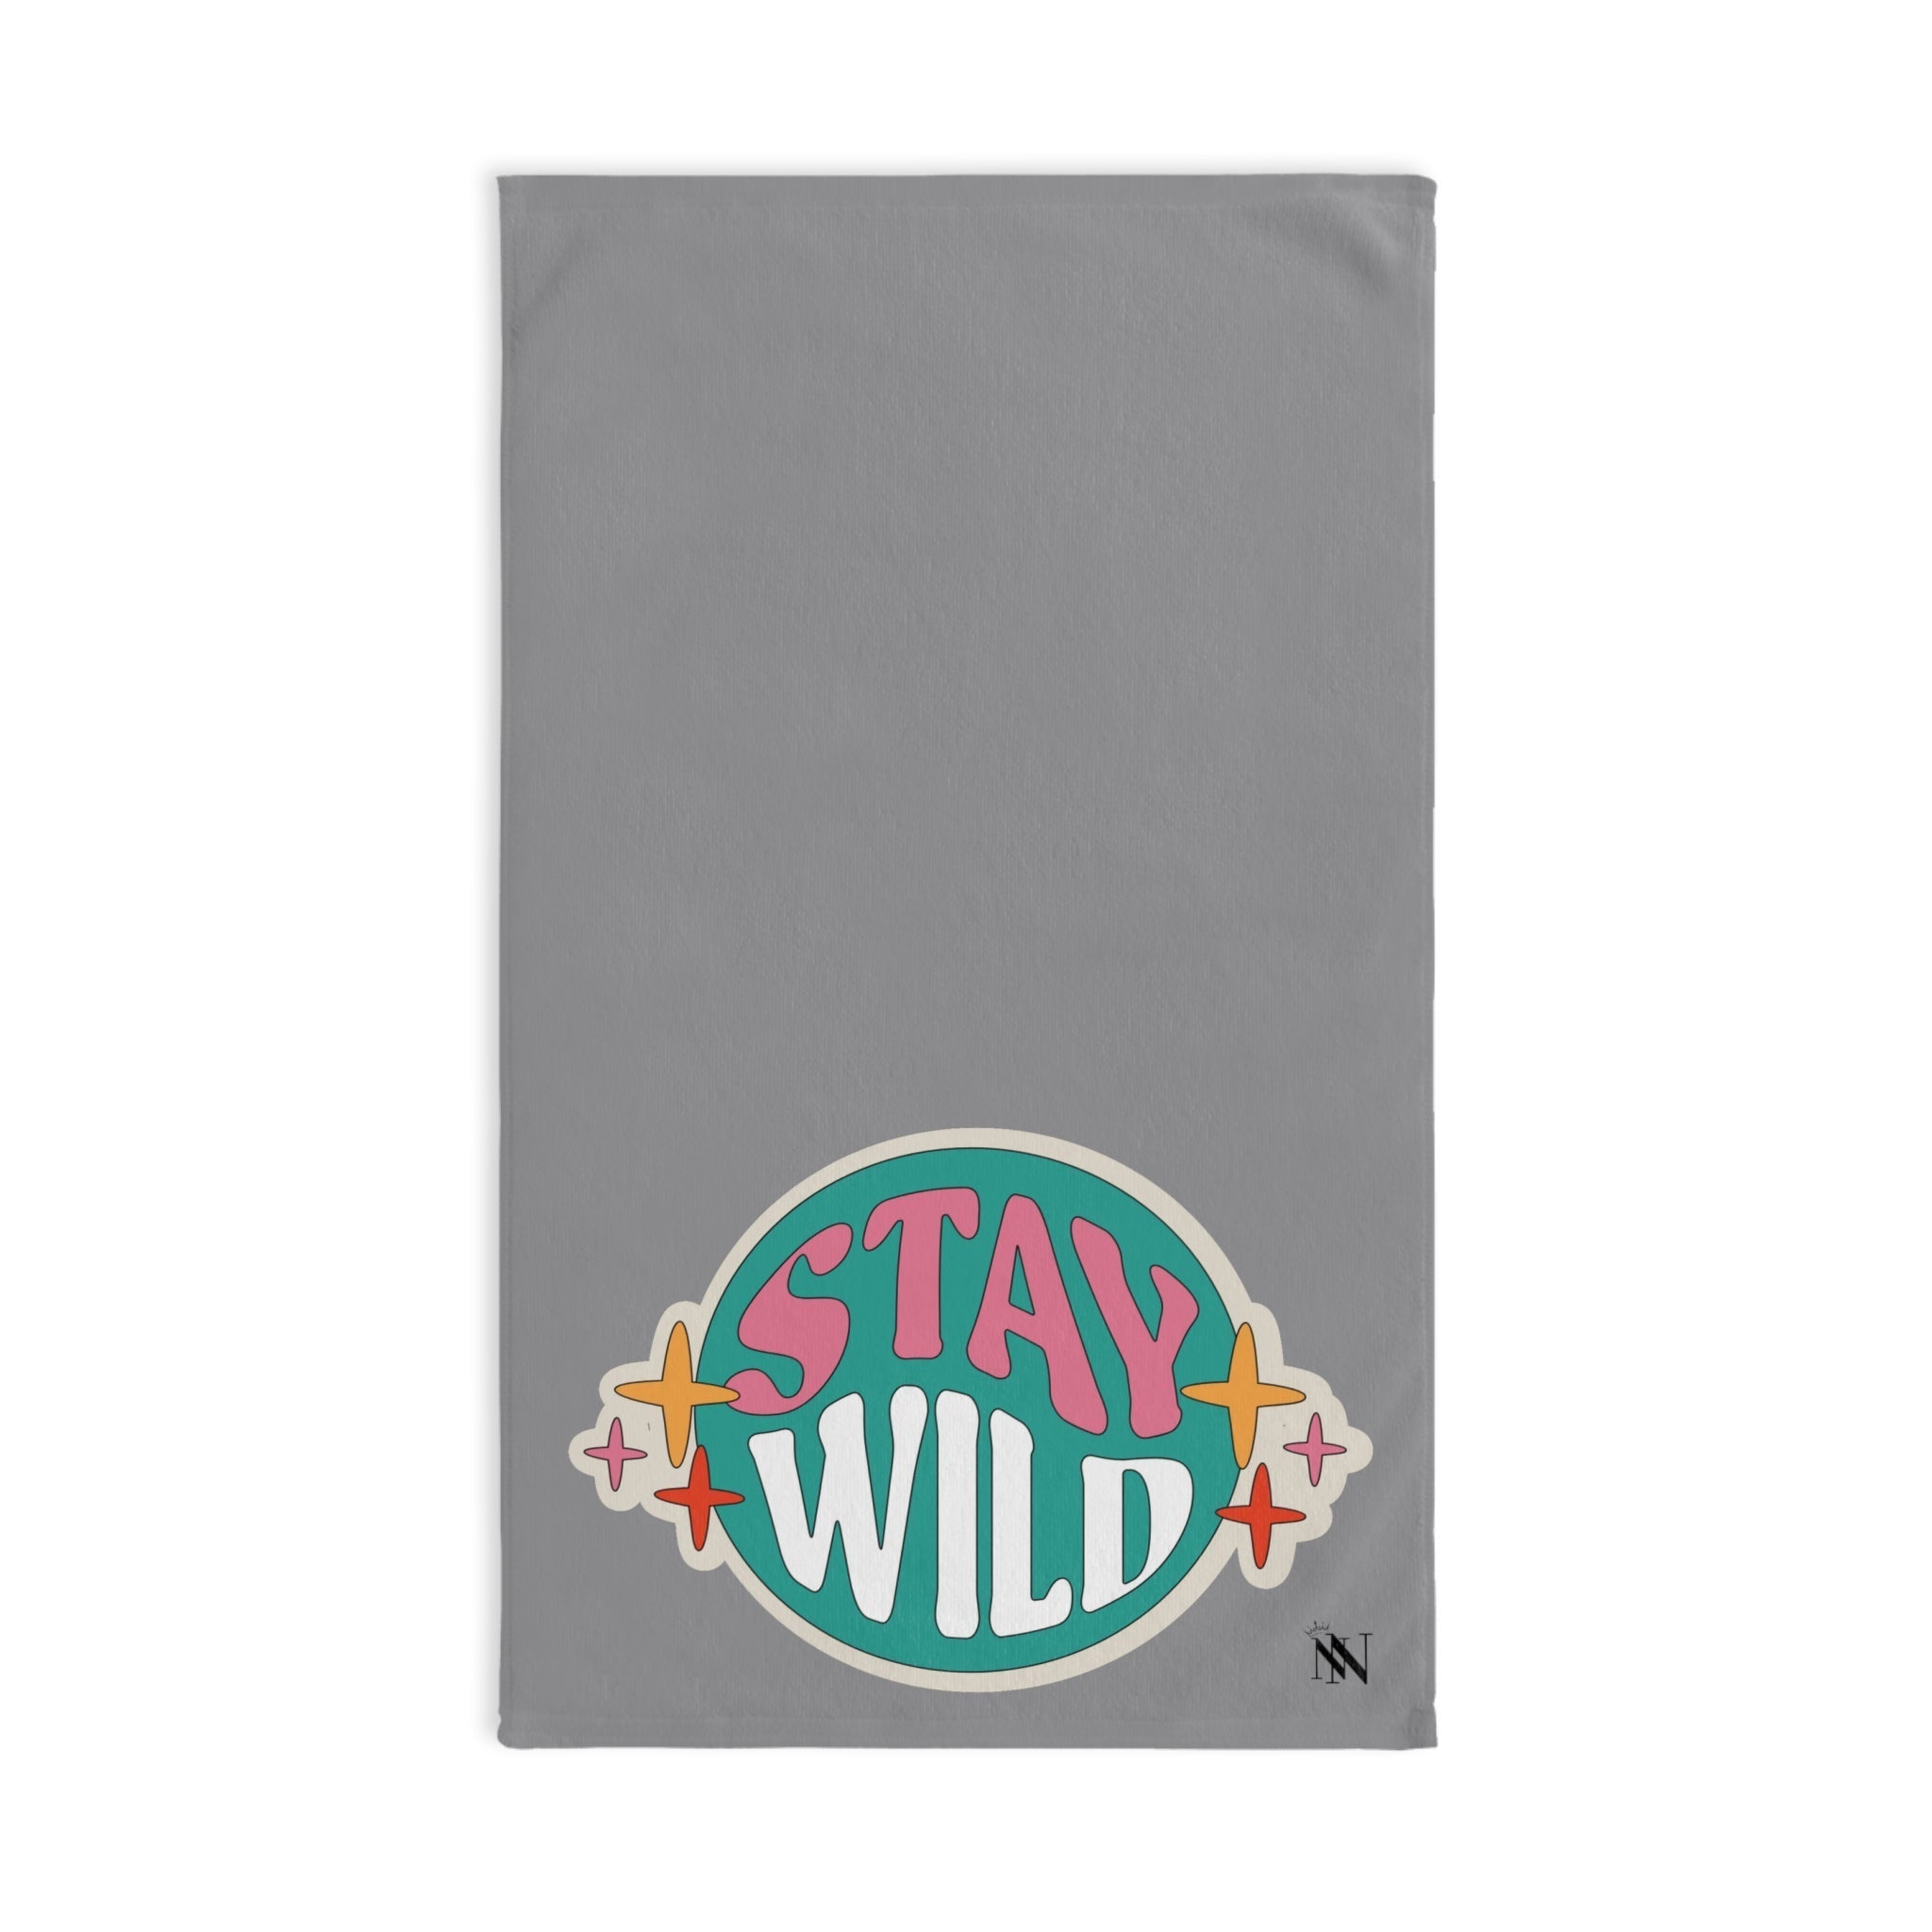 Stay Wild Boho Retro Grey | Anniversary Wedding, Christmas, Valentines Day, Birthday Gifts for Him, Her, Romantic Gifts for Wife, Girlfriend, Couples Gifts for Boyfriend, Husband NECTAR NAPKINS